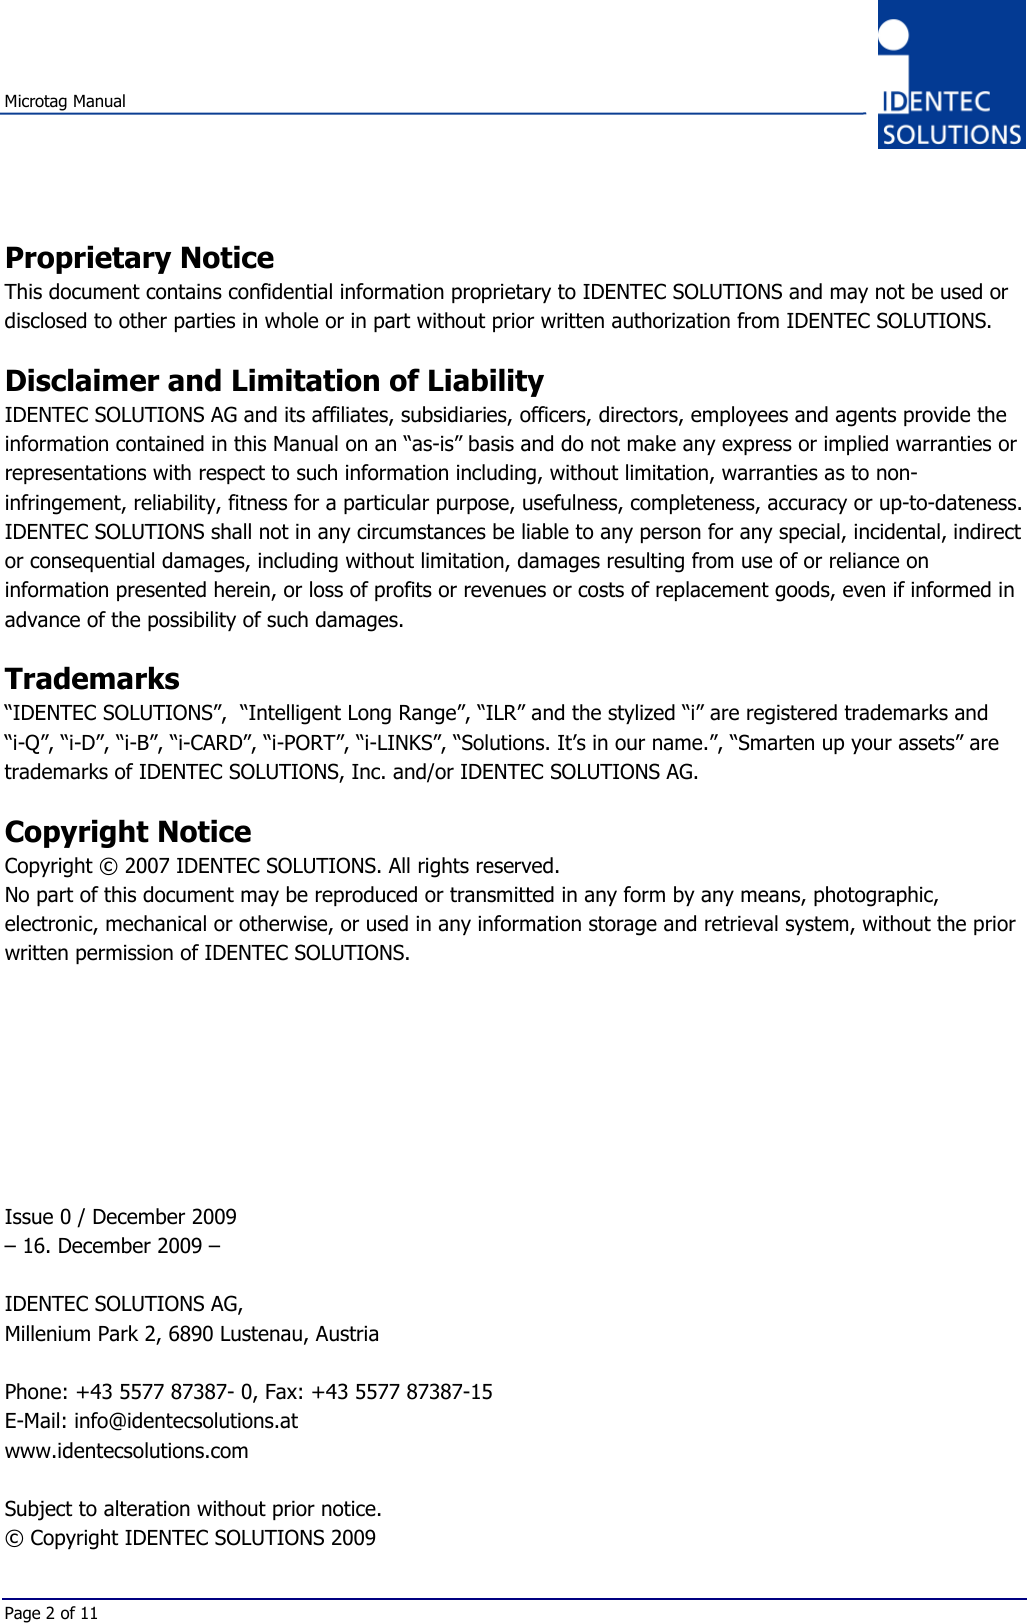 Microtag ManualPage 2 of 11Proprietary NoticeThis document contains confidential information proprietary to IDENTEC SOLUTIONS and may not be used ordisclosed to other parties in whole or in part without prior written authorization from IDENTEC SOLUTIONS.Disclaimer and Limitation of LiabilityIDENTEC SOLUTIONS AG and its affiliates, subsidiaries, officers, directors, employees and agents provide theinformation contained in this Manual on an “as-is” basis and do not make any express or implied warranties orrepresentations with respect to such information including, without limitation, warranties as to non-infringement, reliability, fitness for a particular purpose, usefulness, completeness, accuracy or up-to-dateness.IDENTEC SOLUTIONS shall not in any circumstances be liable to any person for any special, incidental, indirector consequential damages, including without limitation, damages resulting from use of or reliance oninformation presented herein, or loss of profits or revenues or costs of replacement goods, even if informed inadvance of the possibility of such damages.Trademarks“IDENTEC SOLUTIONS”,  “Intelligent Long Range”, “ILR” and the stylized “i” are registered trademarks and“i-Q”, “i-D”, “i-B”, “i-CARD”, “i-PORT”, “i-LINKS”, “Solutions. It’s in our name.”, “Smarten up your assets” aretrademarks of IDENTEC SOLUTIONS, Inc. and/or IDENTEC SOLUTIONS AG.Copyright NoticeCopyright © 2007 IDENTEC SOLUTIONS. All rights reserved.No part of this document may be reproduced or transmitted in any form by any means, photographic,electronic, mechanical or otherwise, or used in any information storage and retrieval system, without the priorwritten permission of IDENTEC SOLUTIONS.Issue 0 / December 2009– 16. December 2009 –IDENTEC SOLUTIONS AG,Millenium Park 2, 6890 Lustenau, AustriaPhone: +43 5577 87387- 0, Fax: +43 5577 87387-15E-Mail: info@identecsolutions.atwww.identecsolutions.comSubject to alteration without prior notice.© Copyright IDENTEC SOLUTIONS 2009